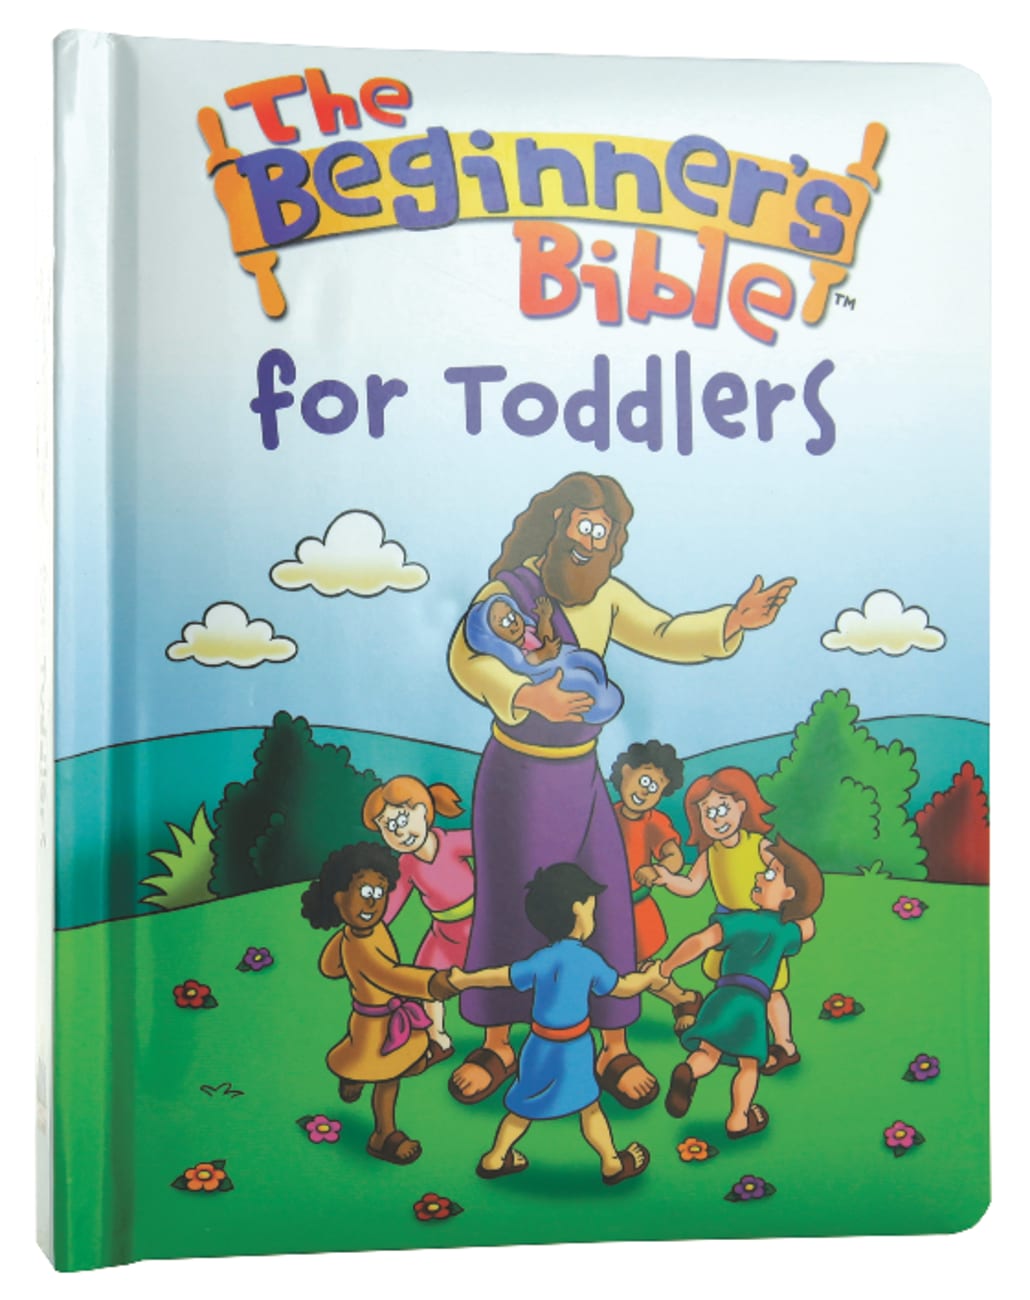 The Beginner's Bible For Toddlers Hardback